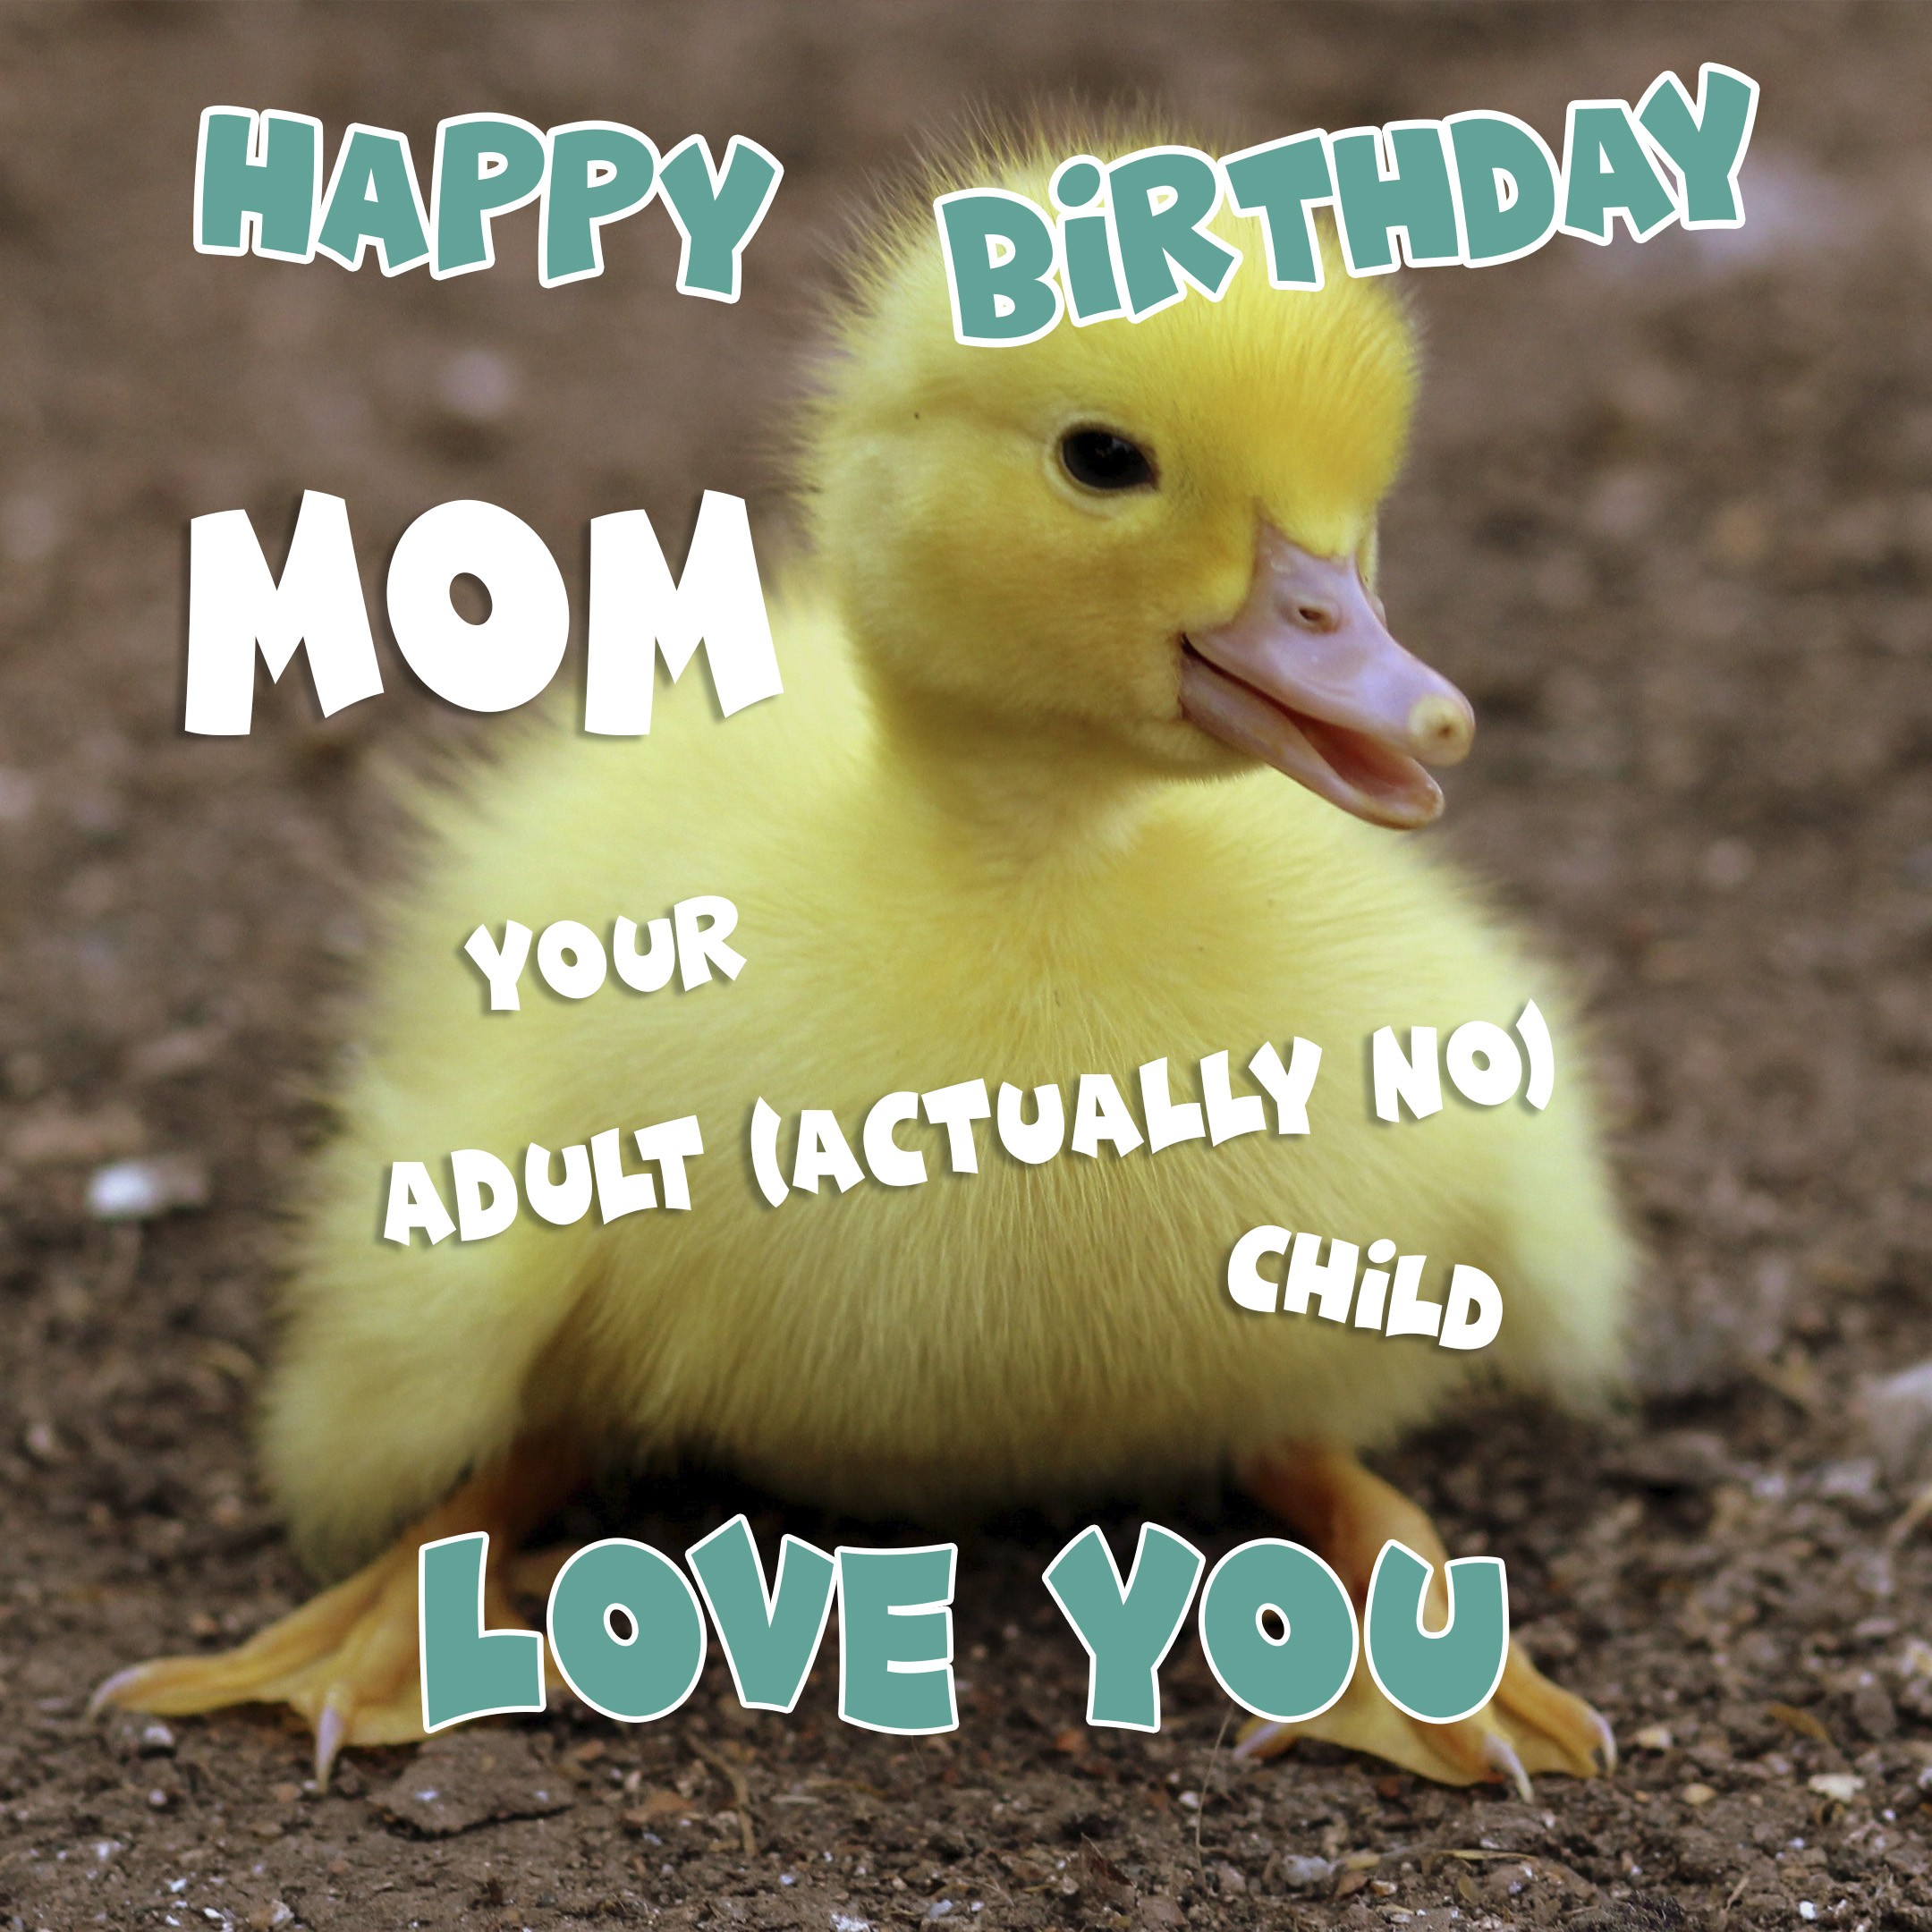 Free Funny Happy Birthday Image For Mom With Duckling - birthdayimg.com